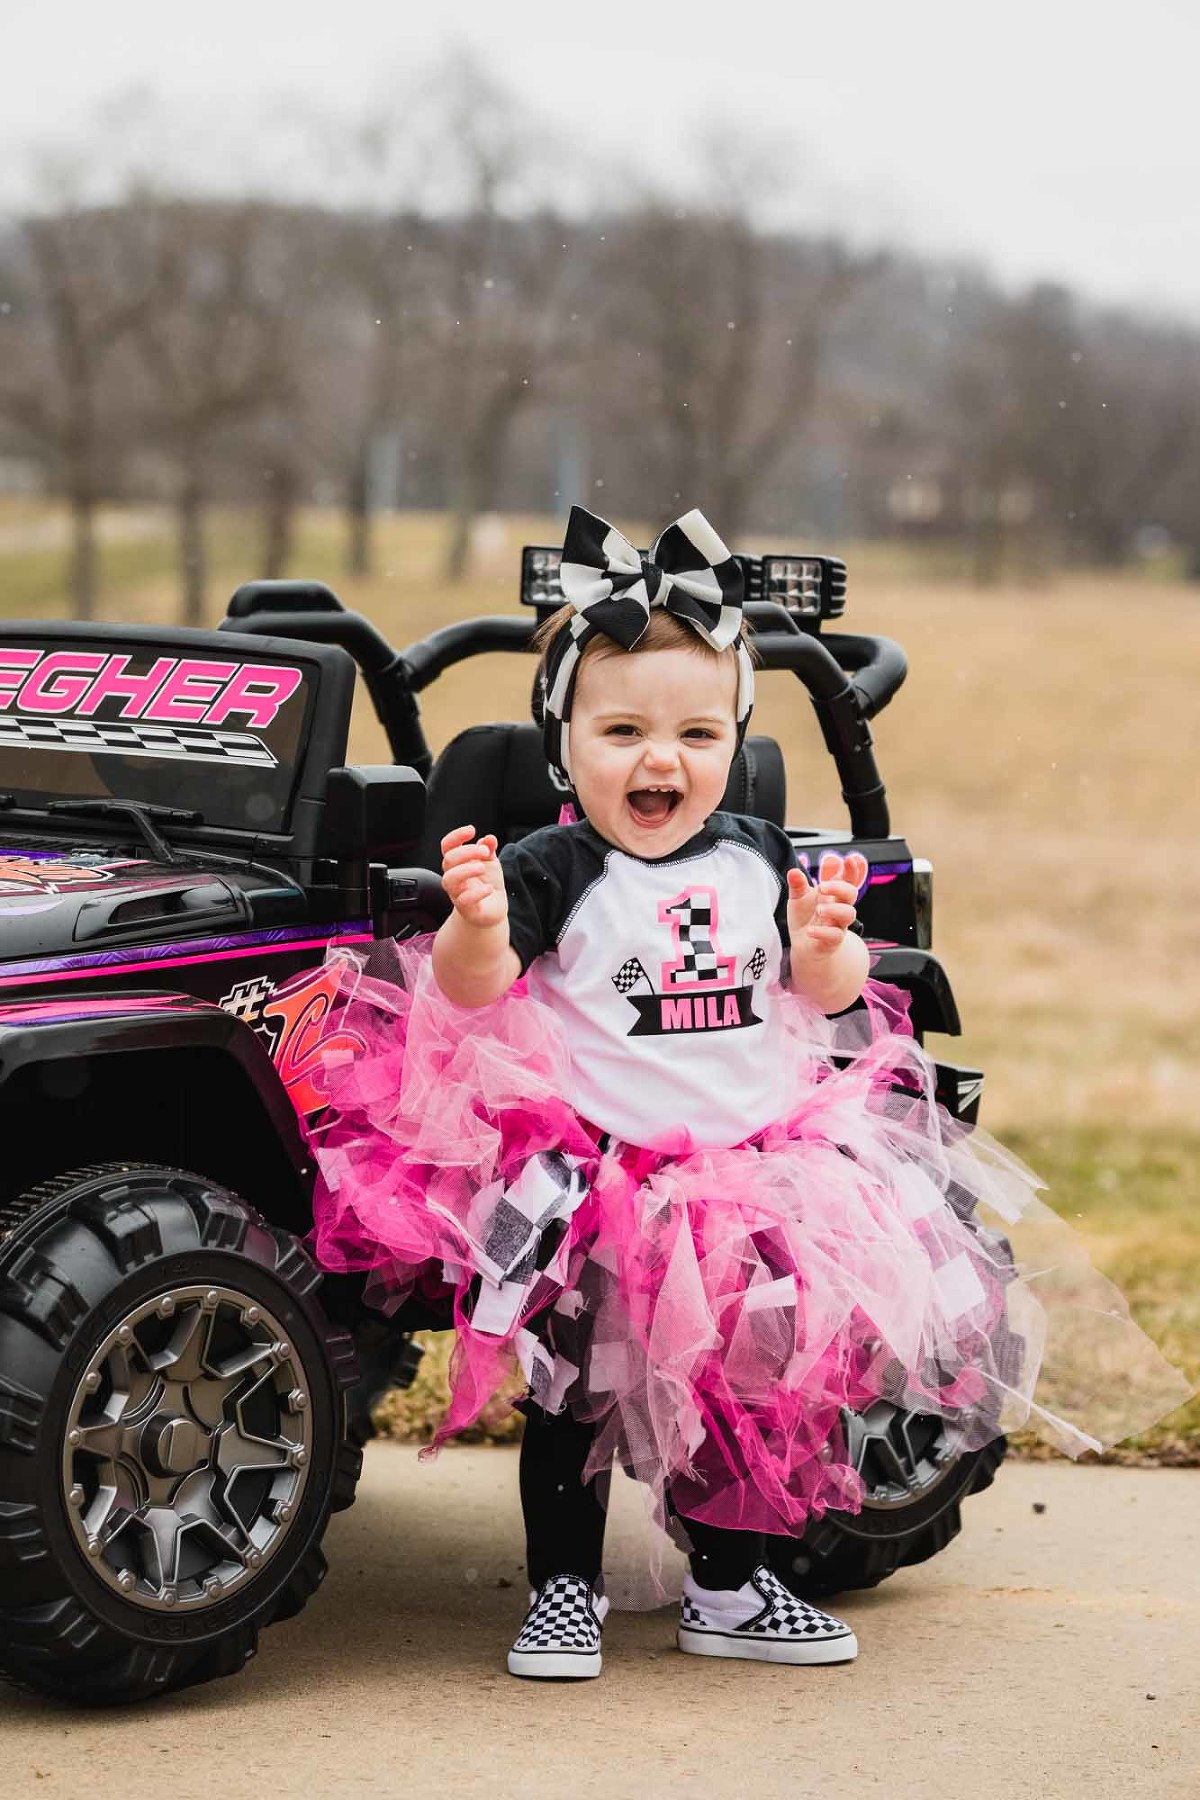 portrait of little girl on her first birthday, wearing a pink tutu and standing in front of a child's size atv.